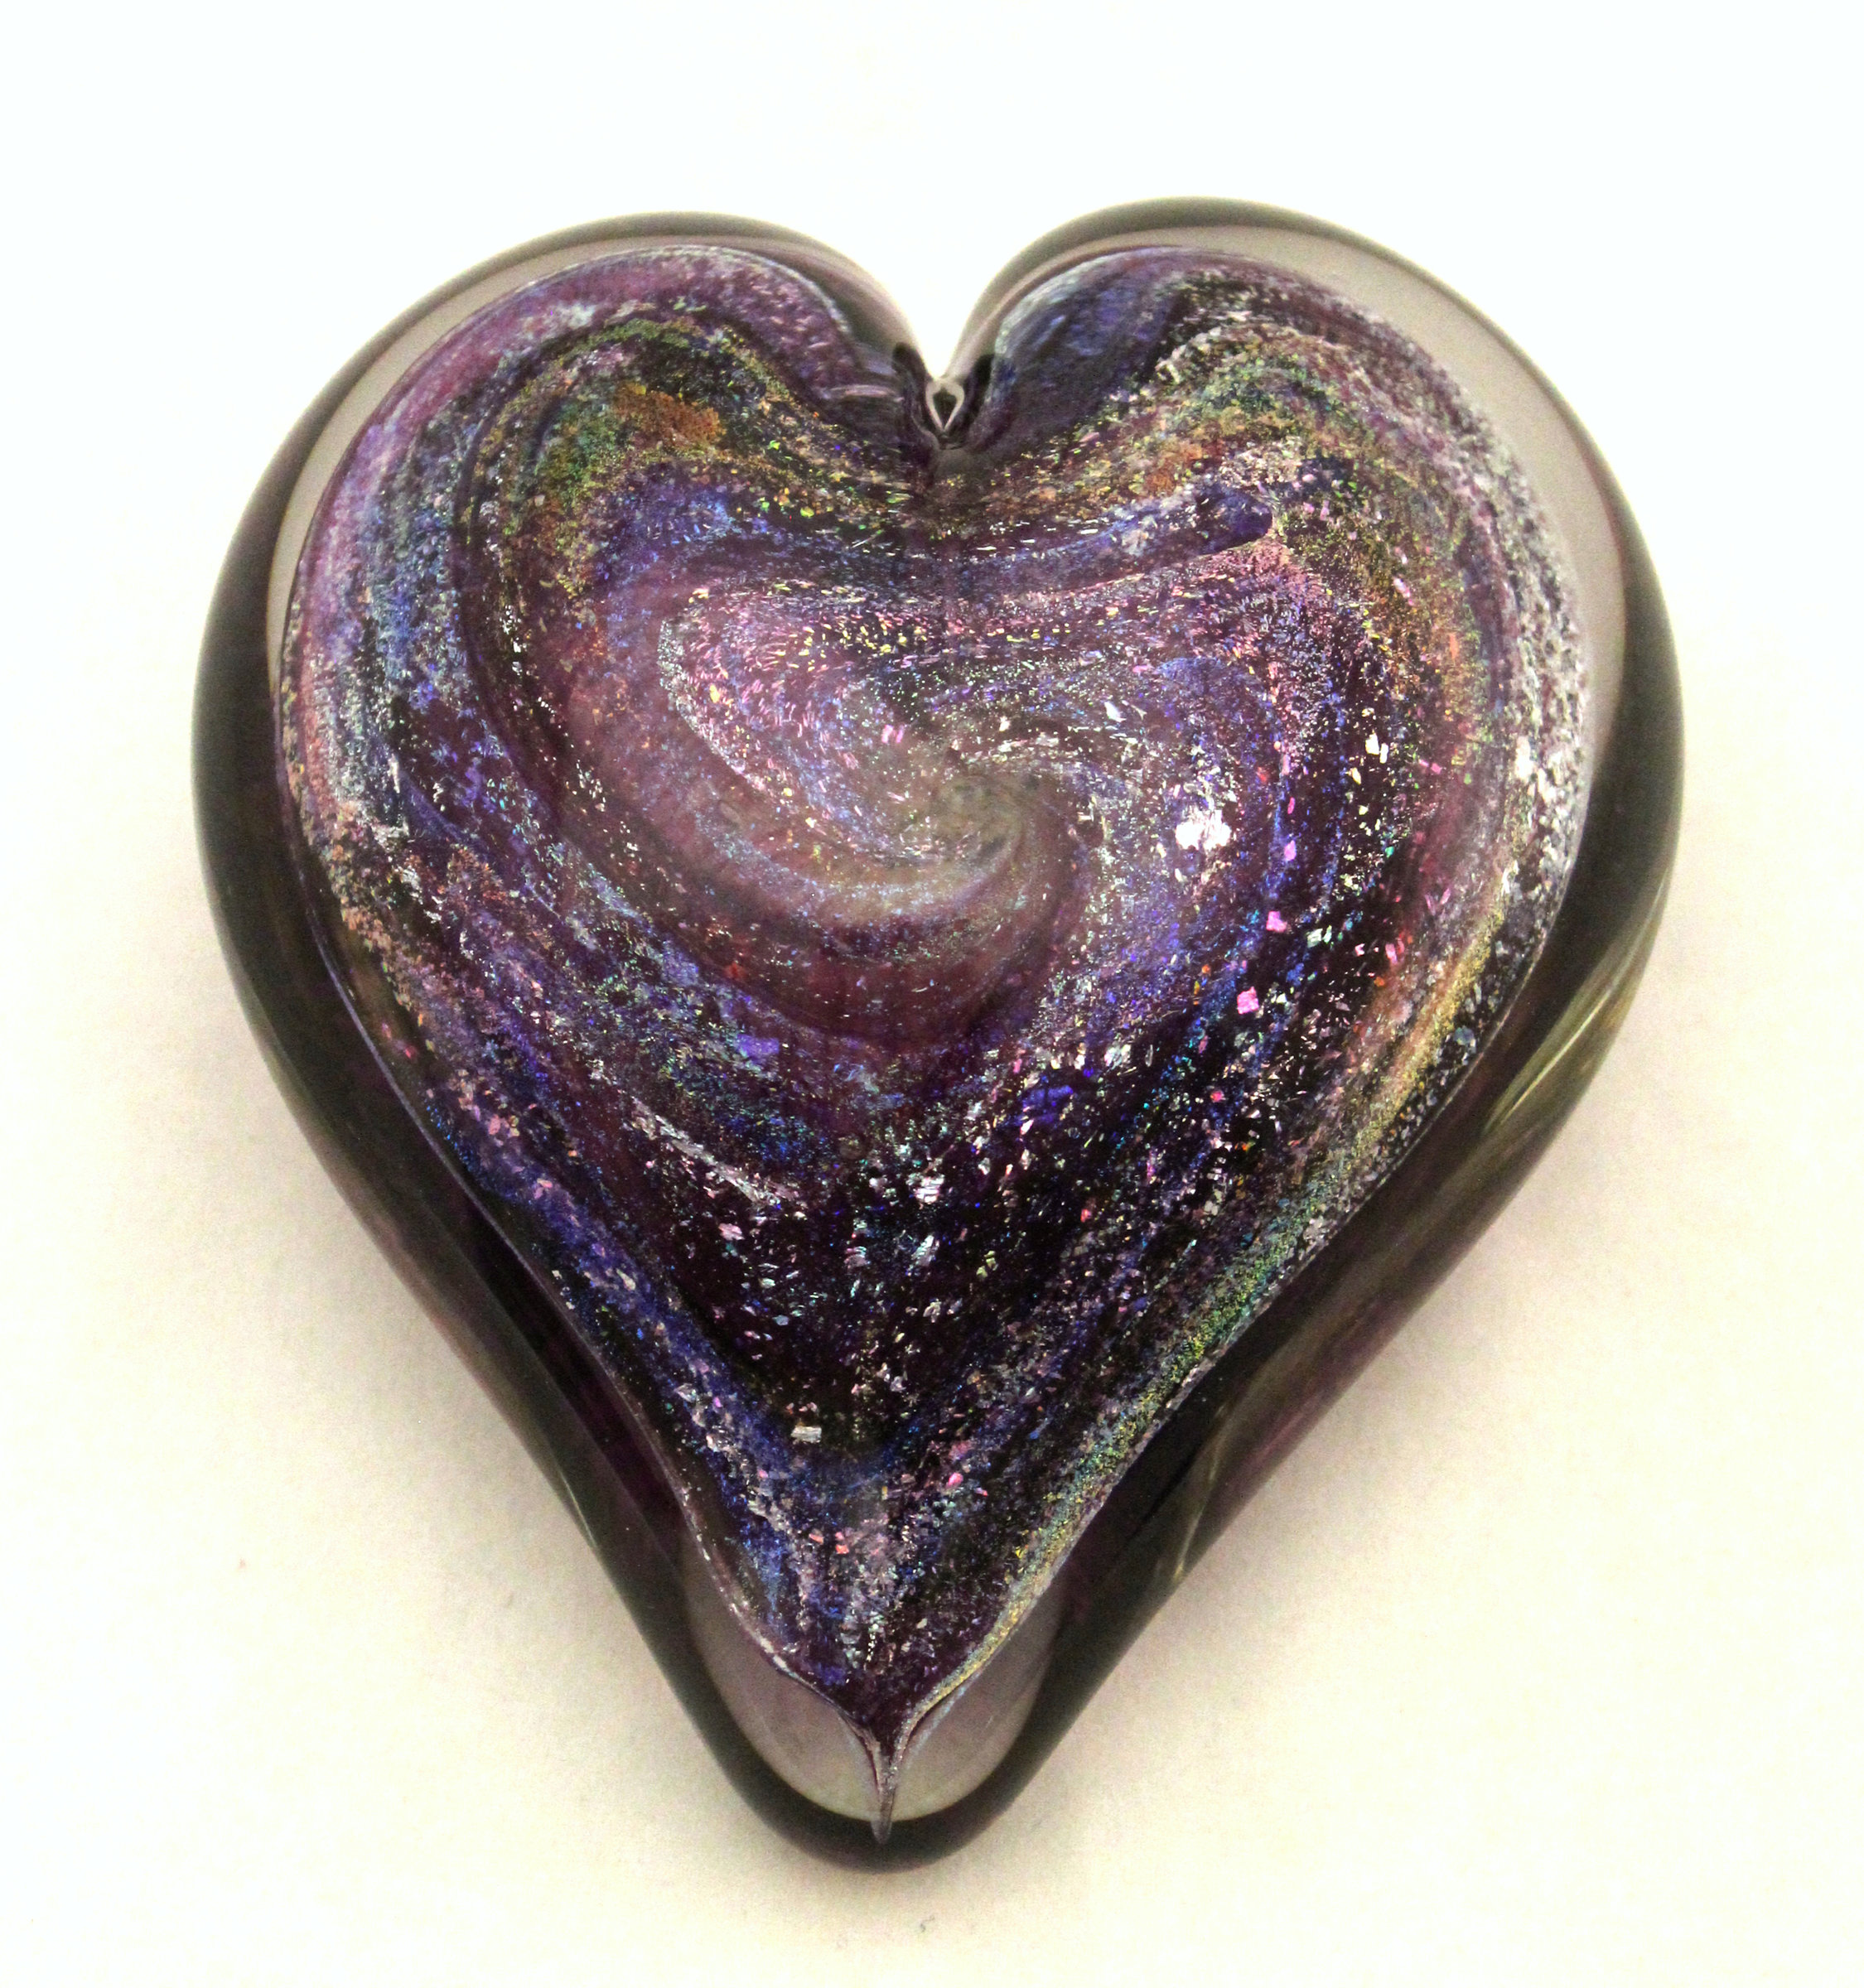 Large Amethyst Dichroic Heart Paperweight By Ken Hanson And Ingrid Hanson Art Glass Paperweight